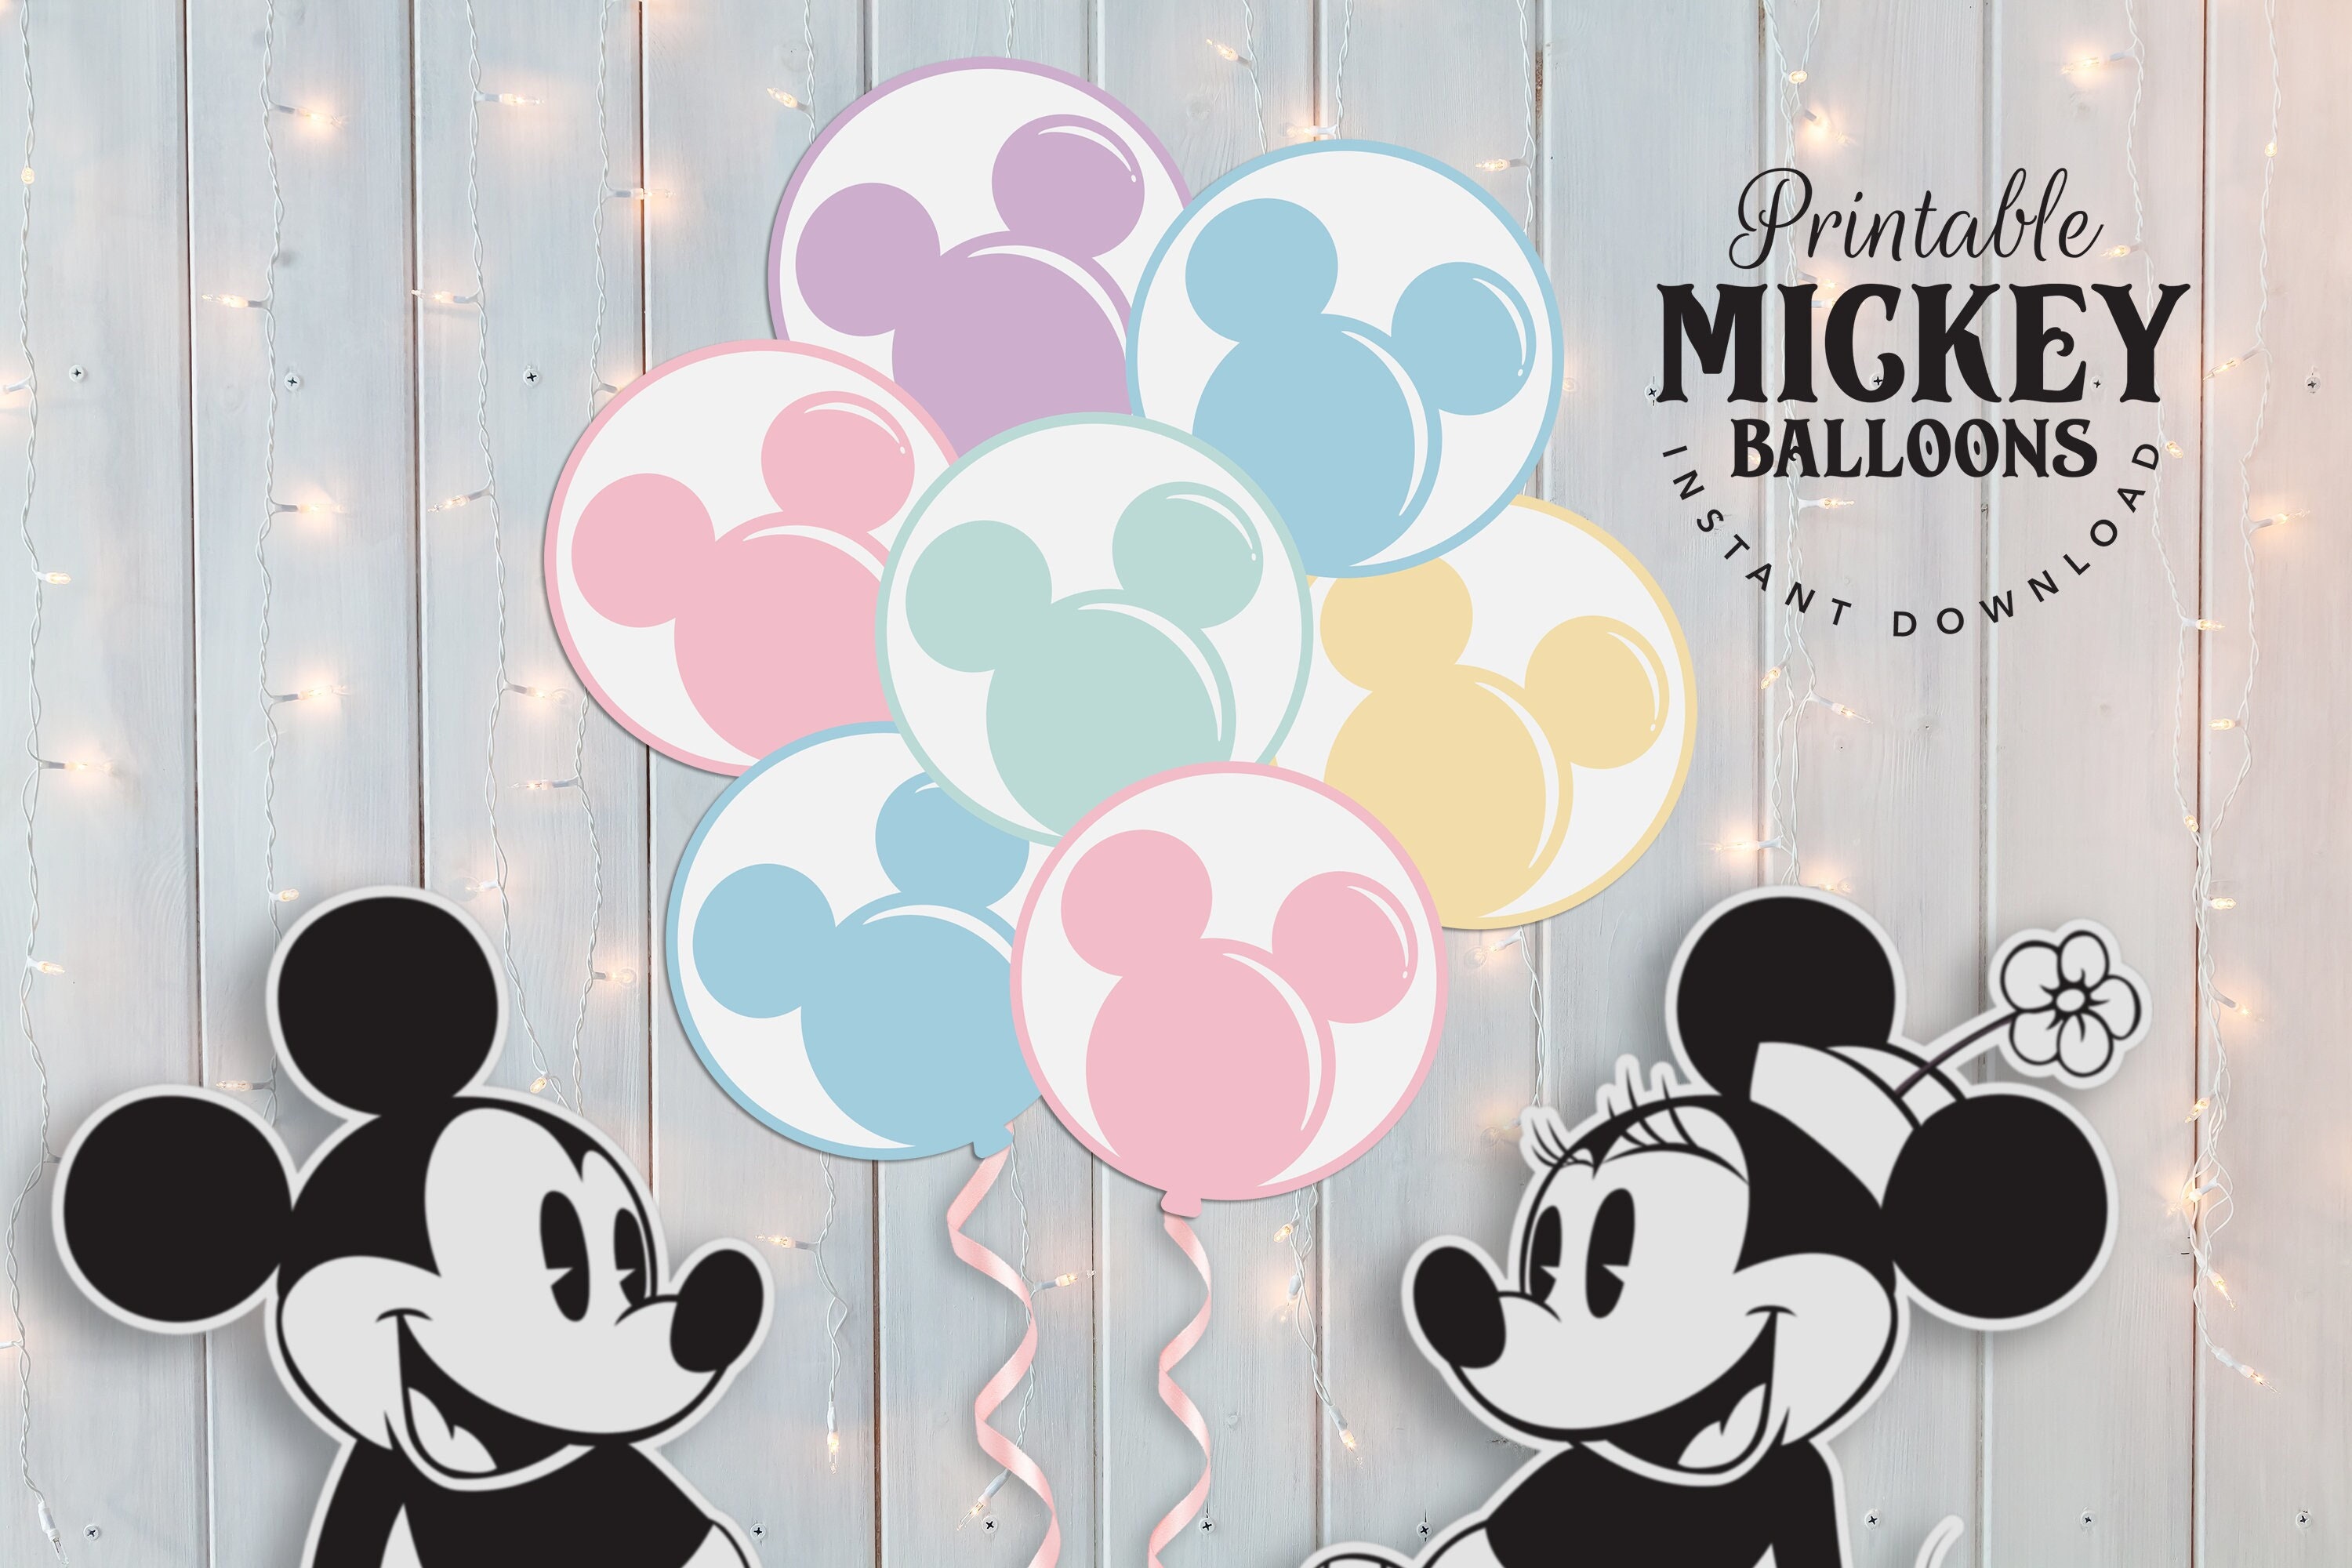 How Much Are Balloons at Disneyland? - Creative Housewives